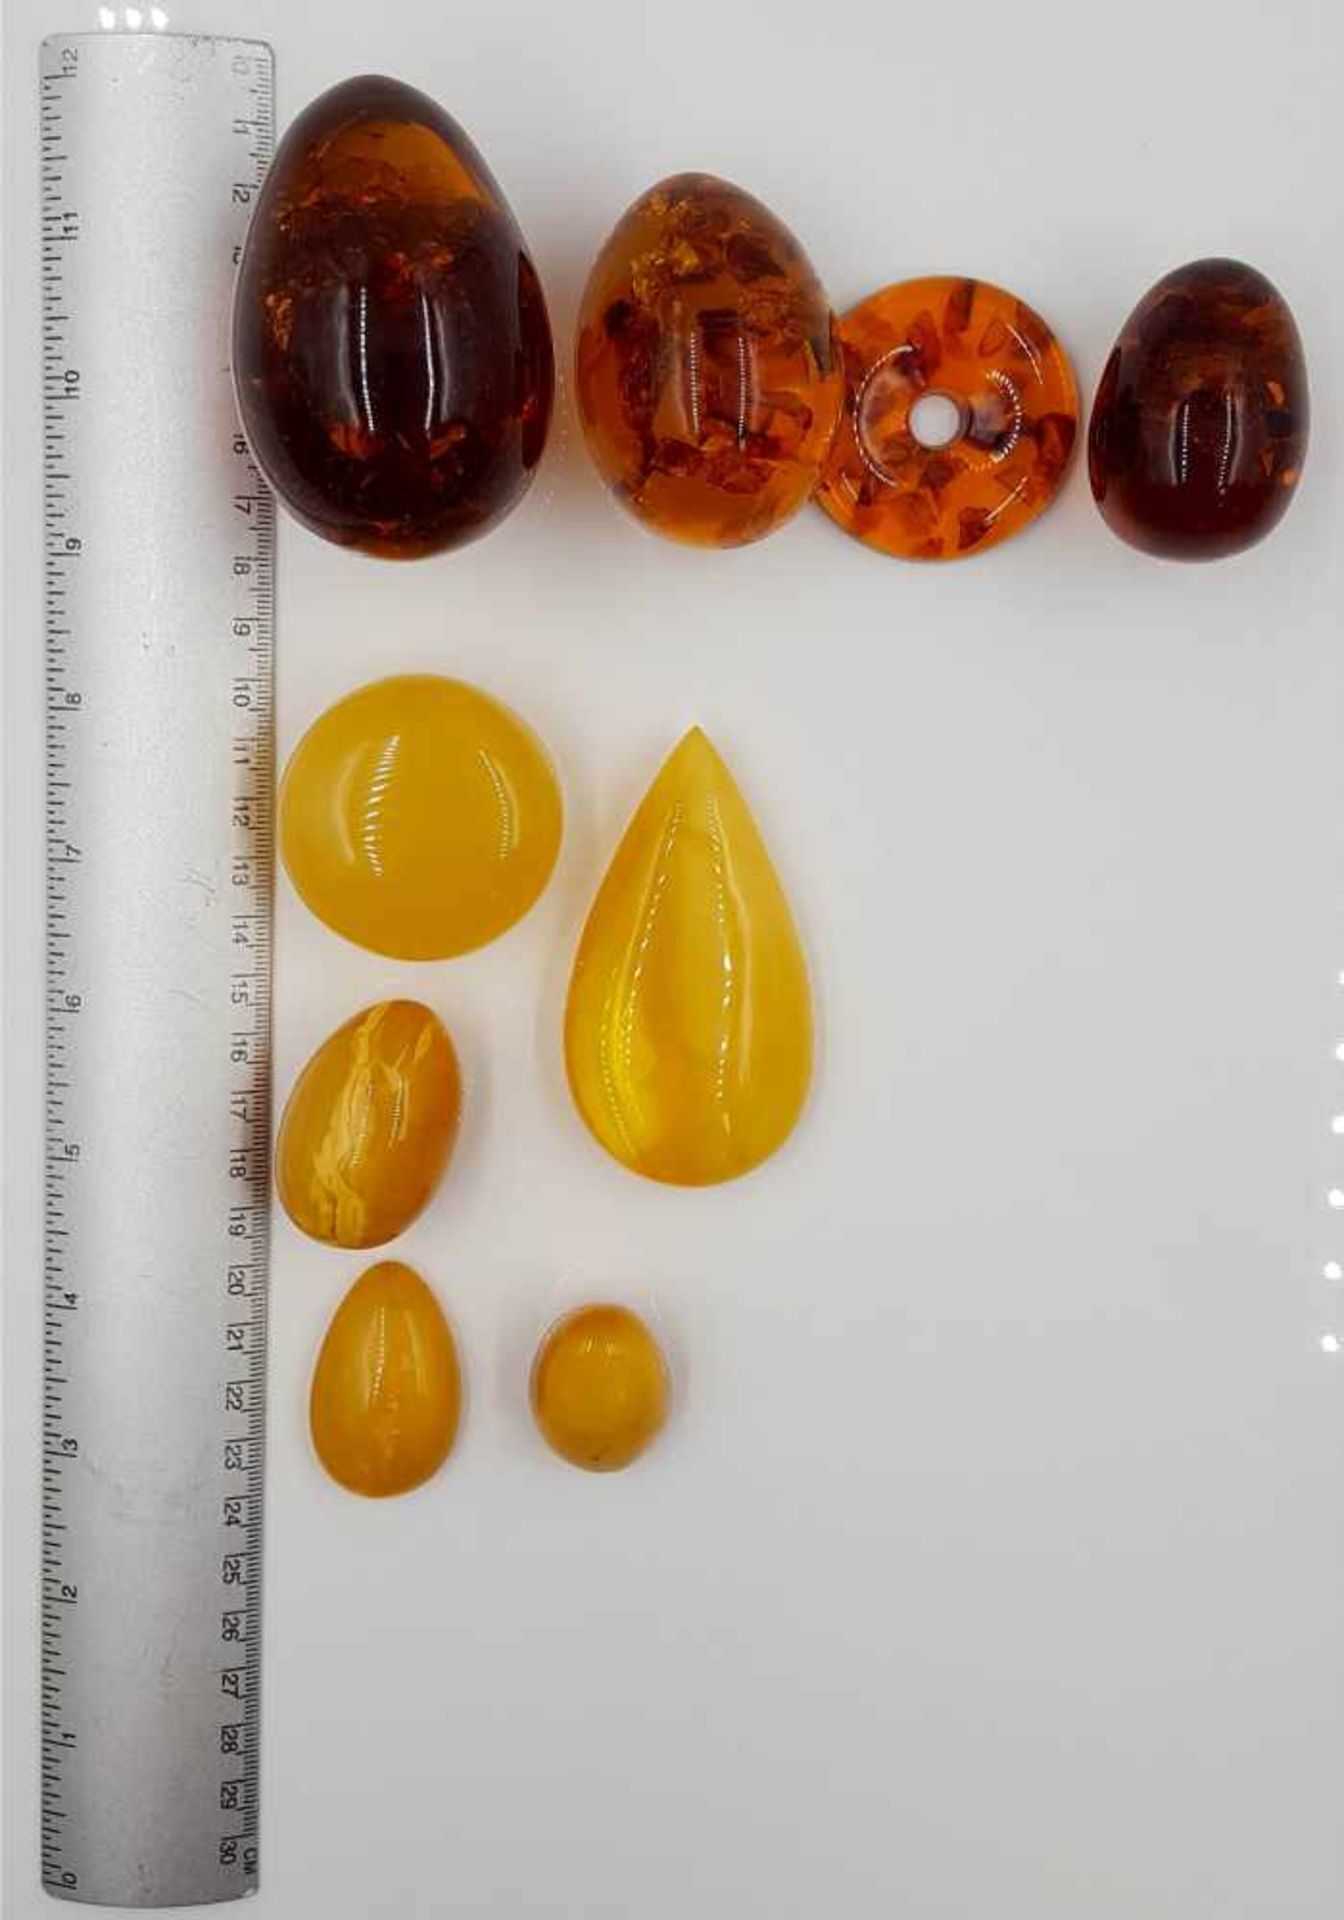 9 amber stones. Some butterscotch color. - Image 6 of 8